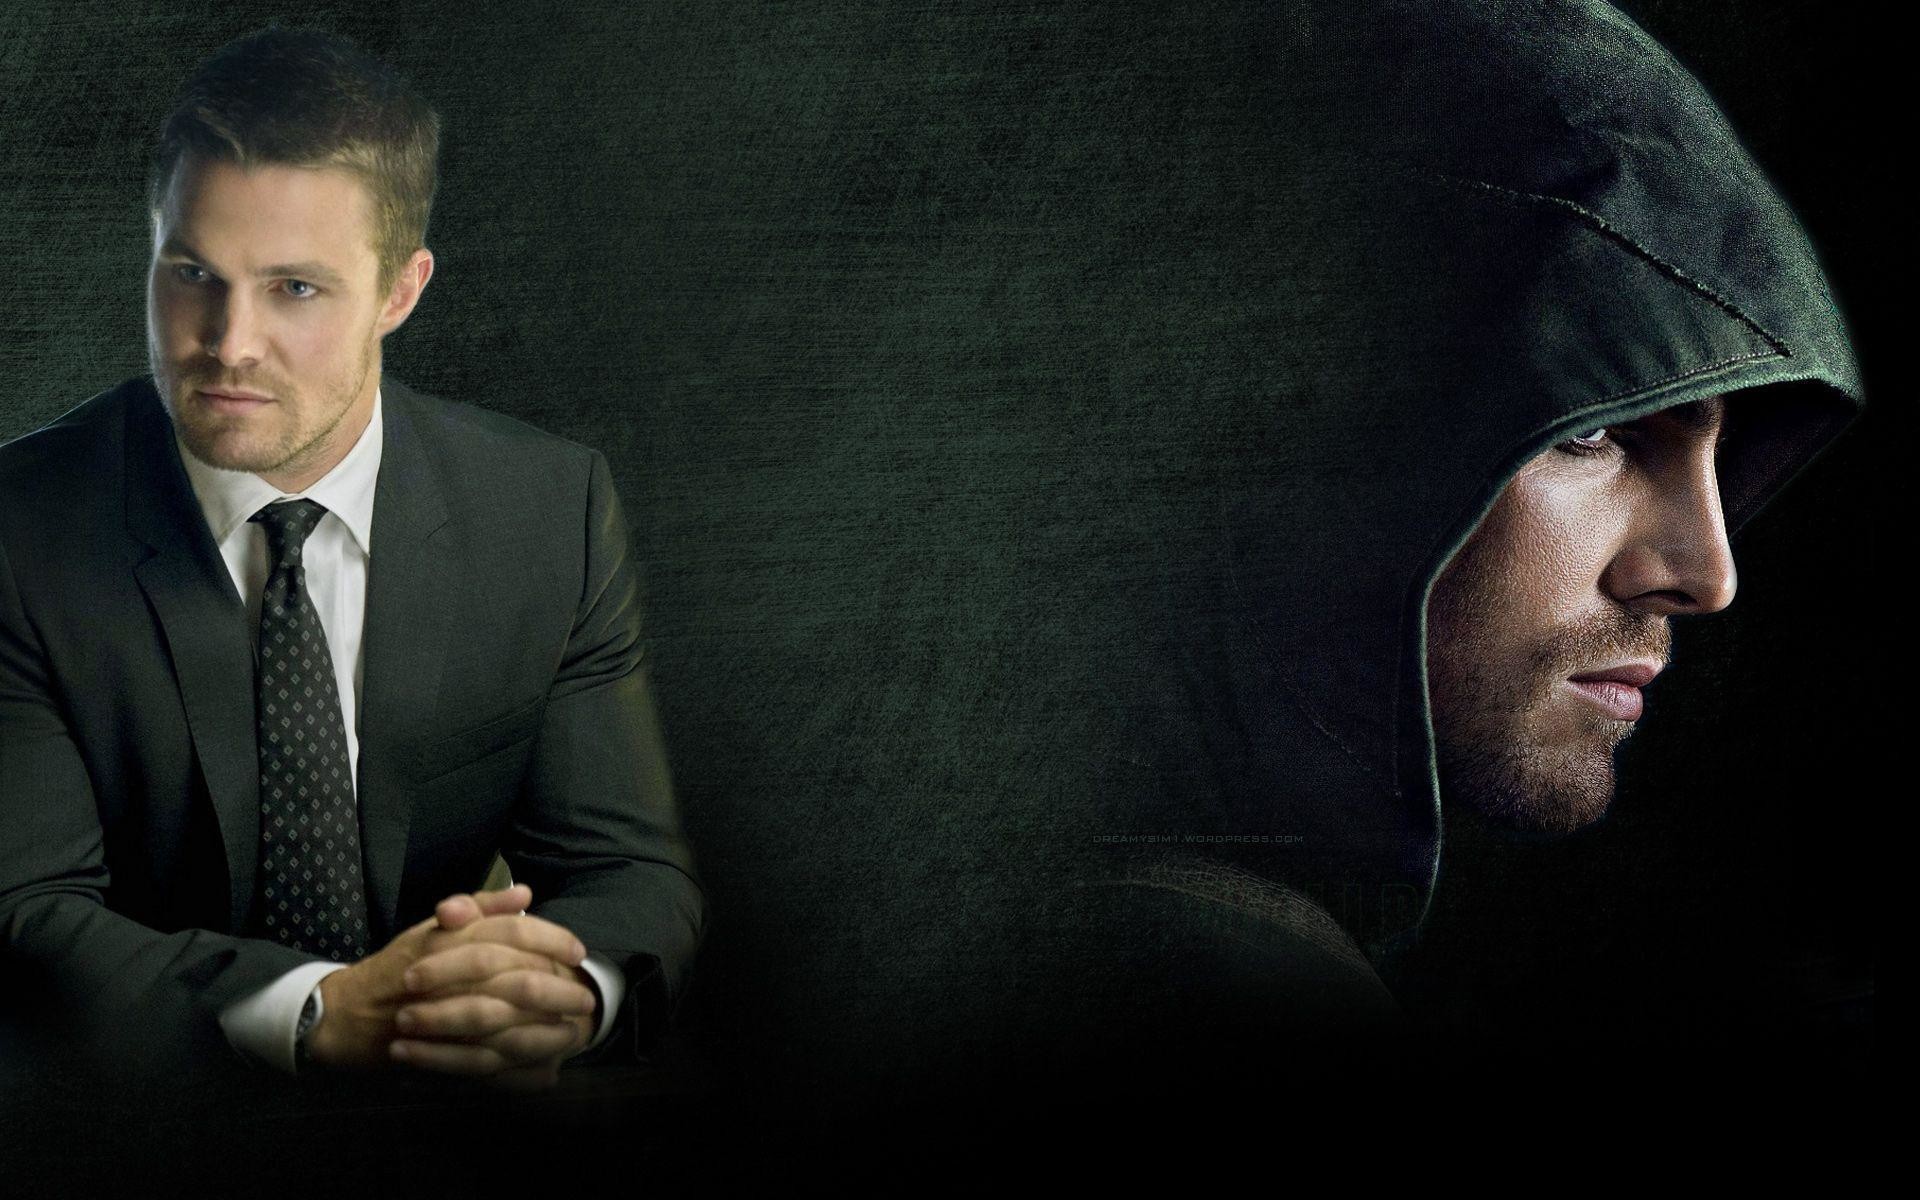 1920x1200  Great New Oliver Queen Wallpapers Made By @DreamySim1 |  Amellynation